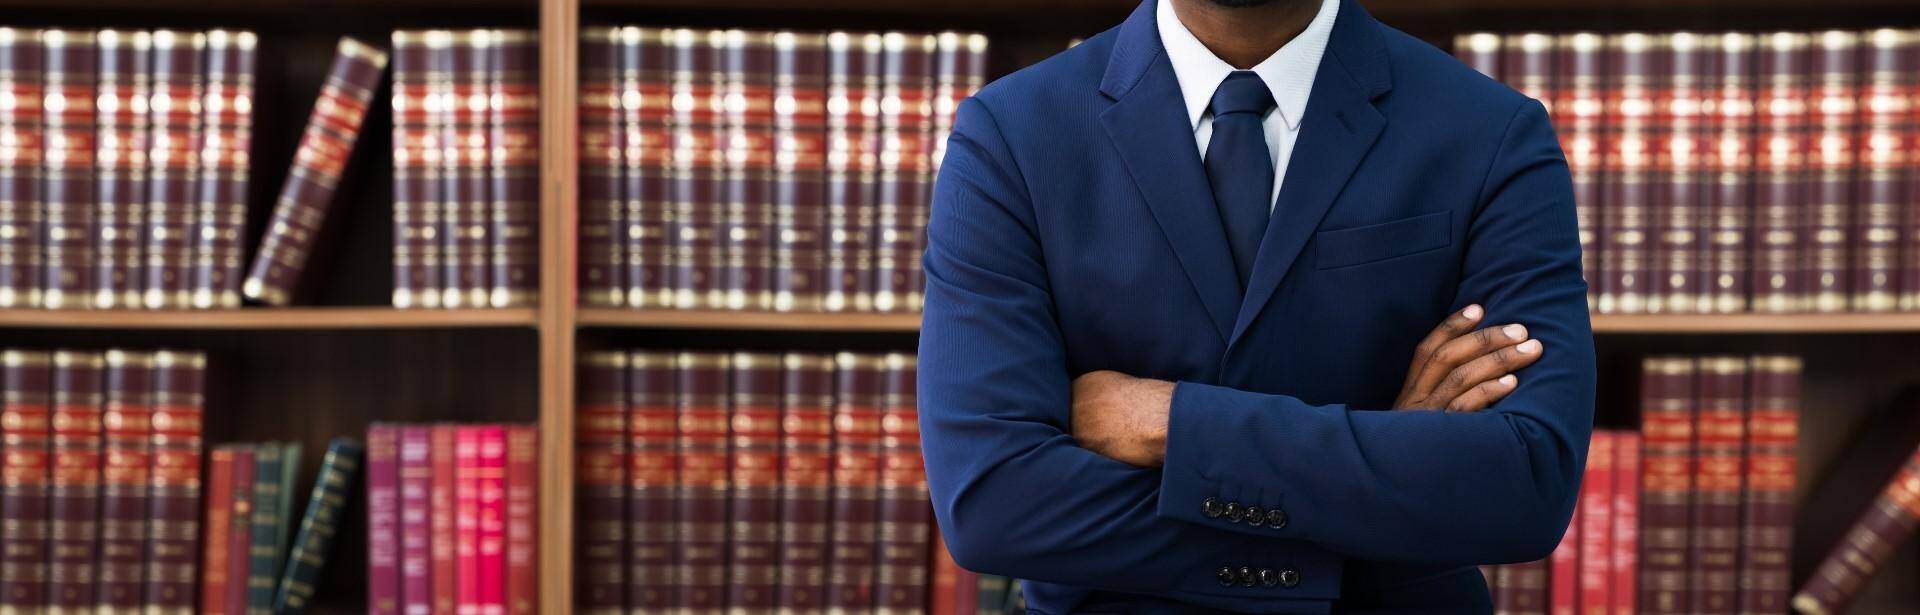 A black lawyer standing in front of a bookshelf of law book in Candler-McAfee, Georgia